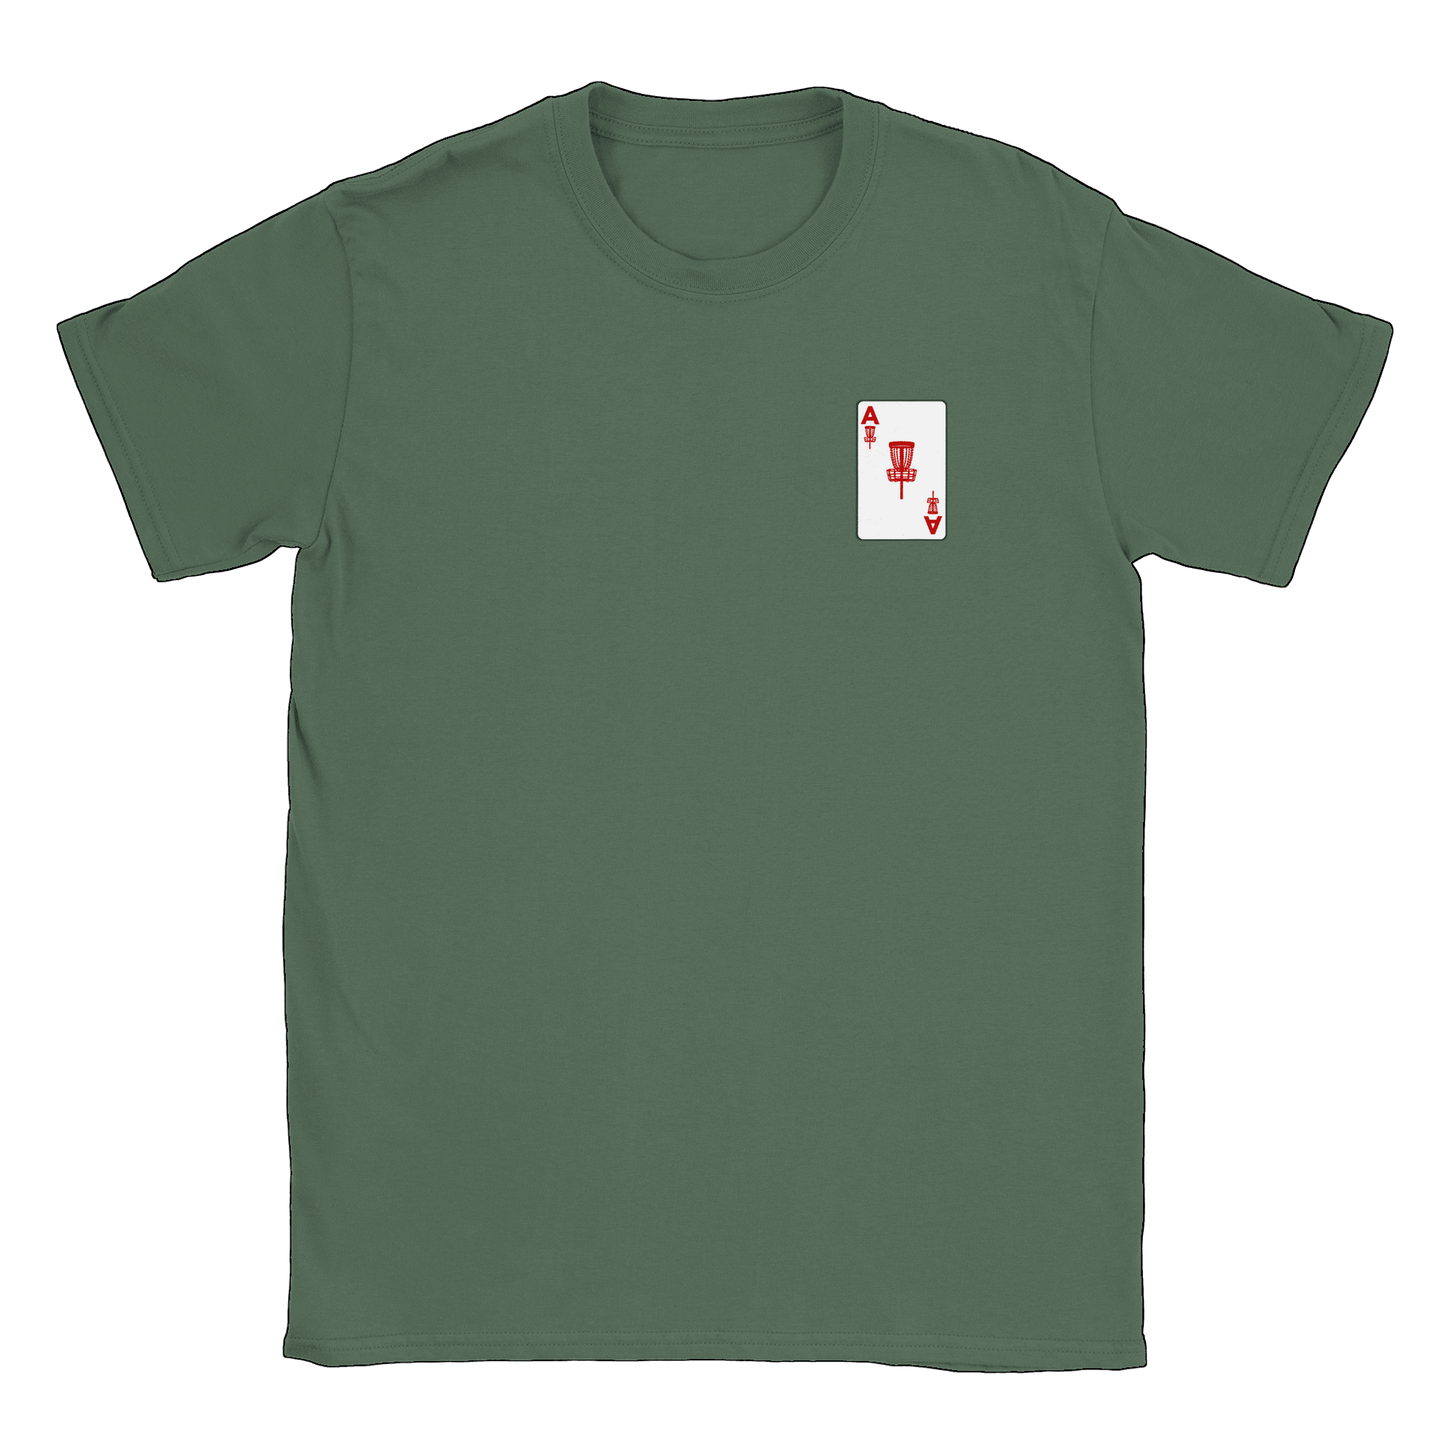 ACE Discgolf litet tryck - T-shirt Military Green